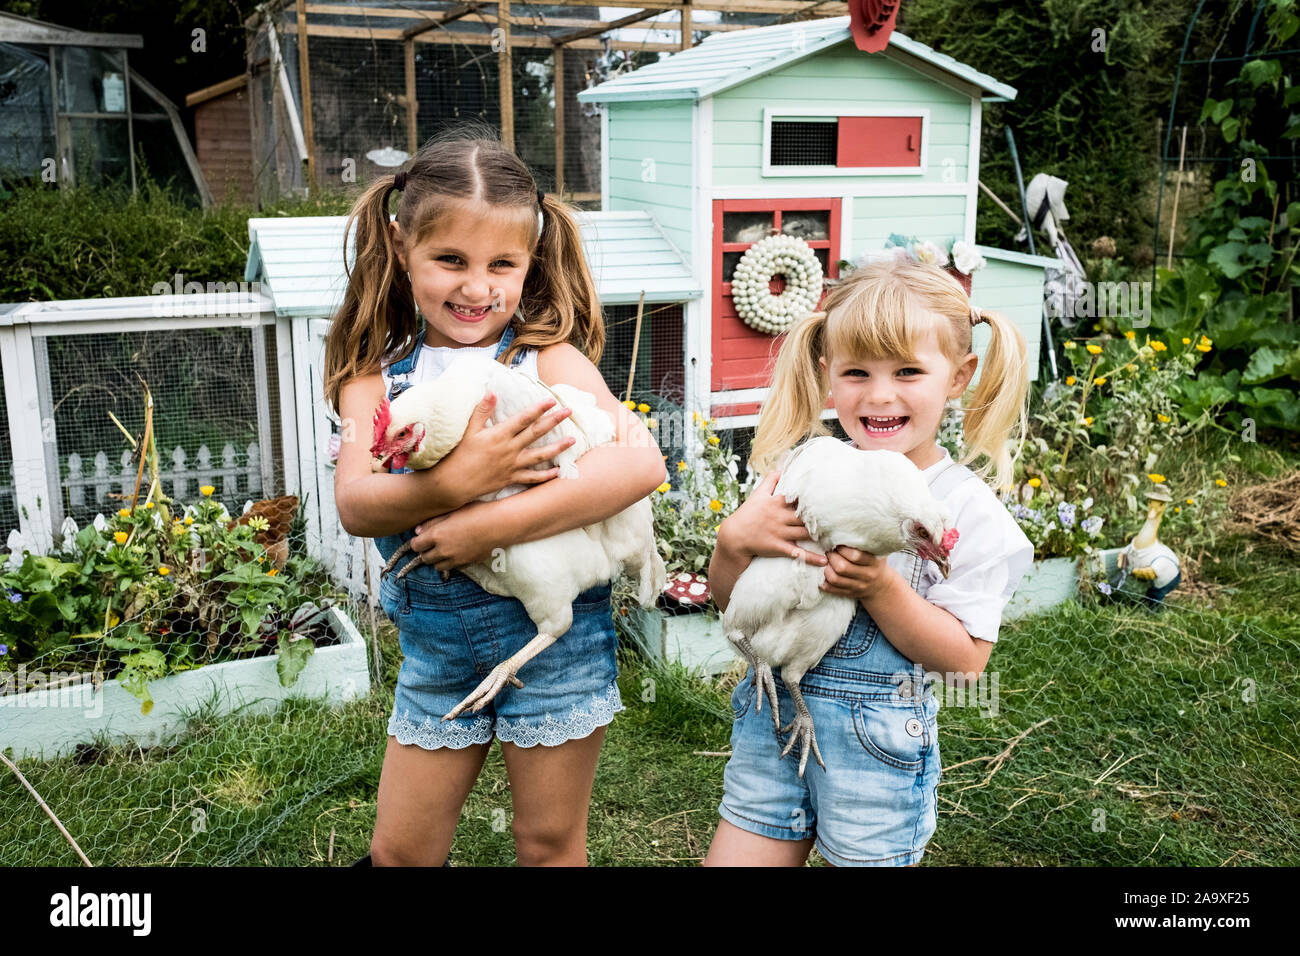 Two girls standing in front of hen house in a garden, holding white chickens, smiling at camera. Stock Photo